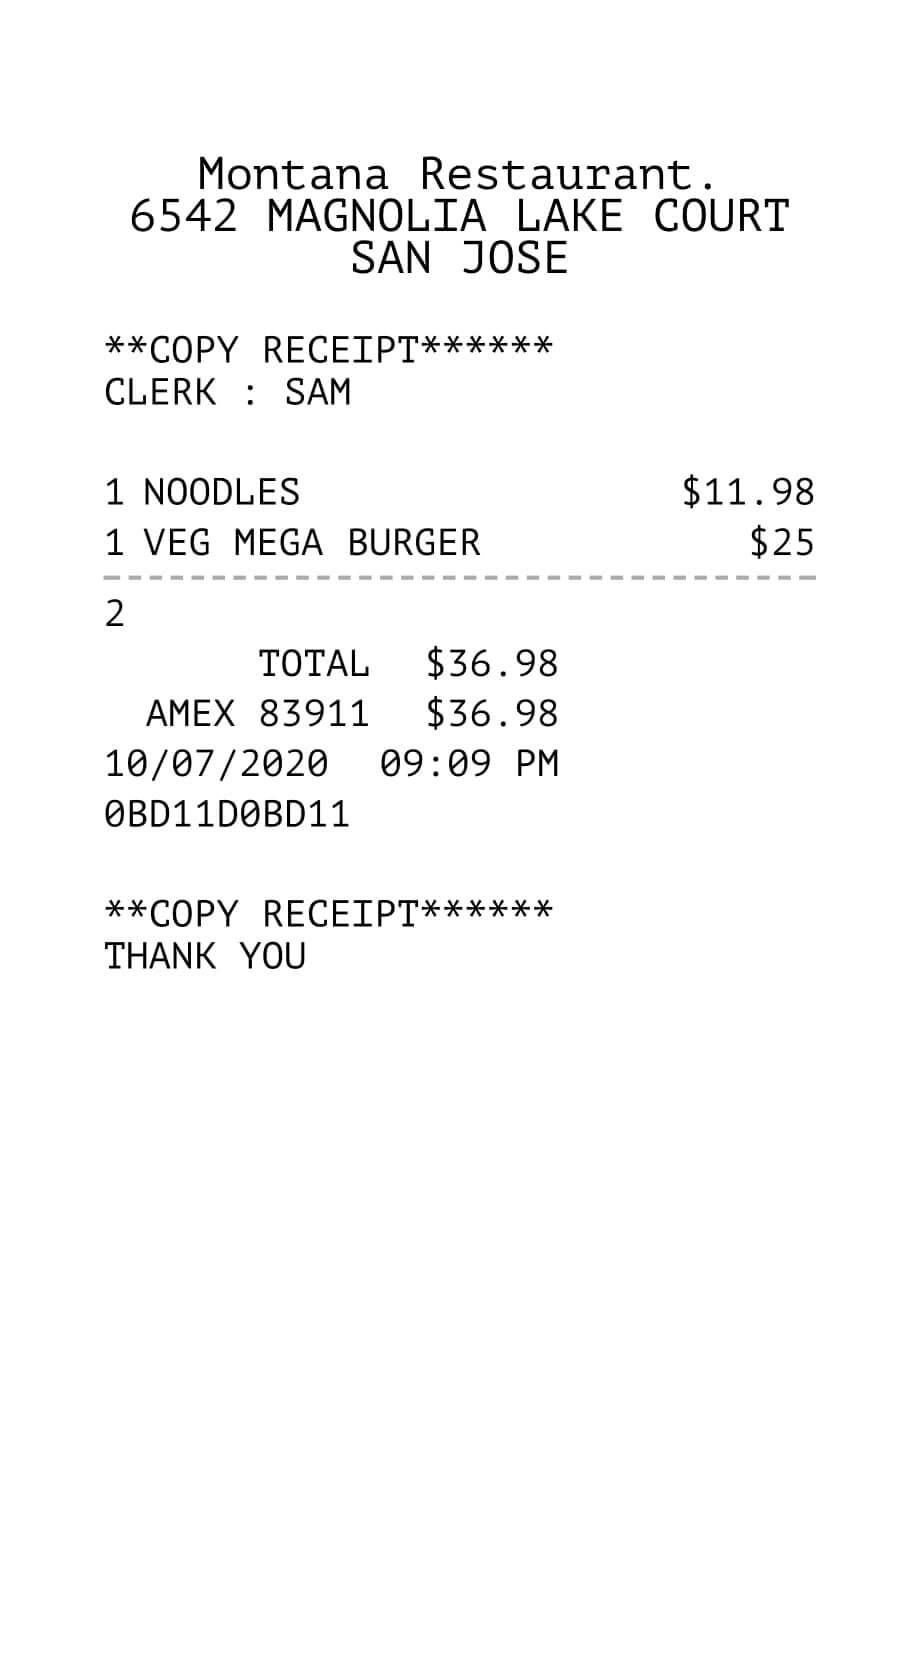 Generate Restaurant Receipts With Customizable Templates